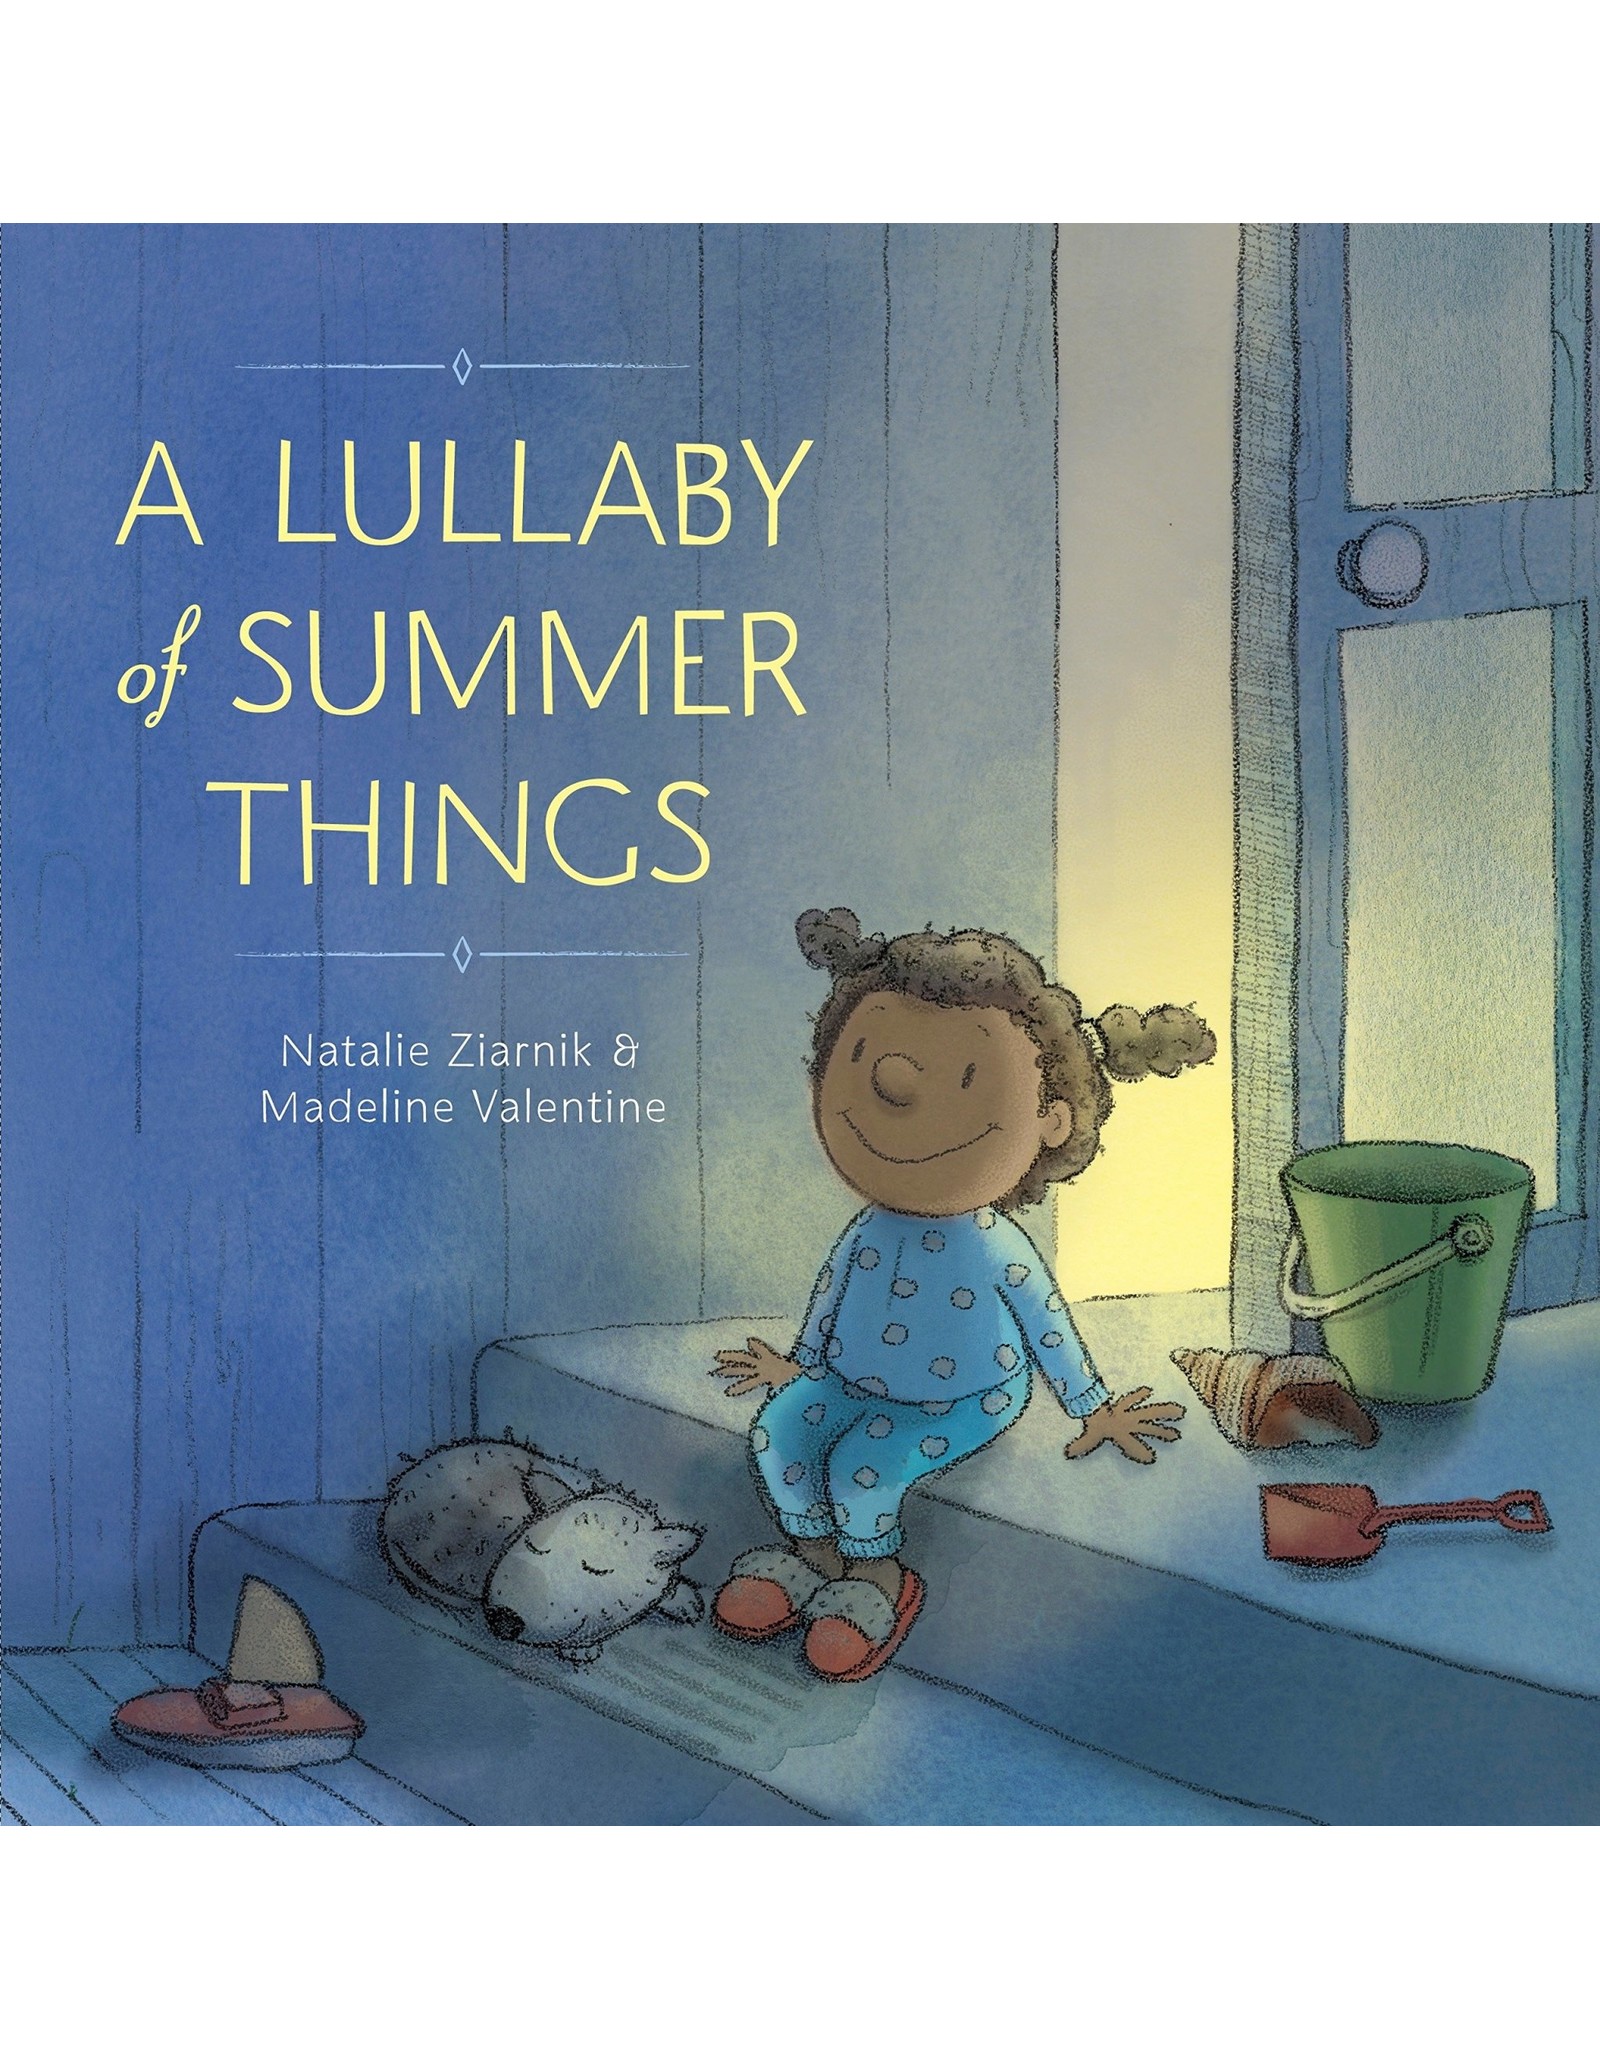 A Lullaby of Summer Things - Natalie Zairnik and Madeline Valentine